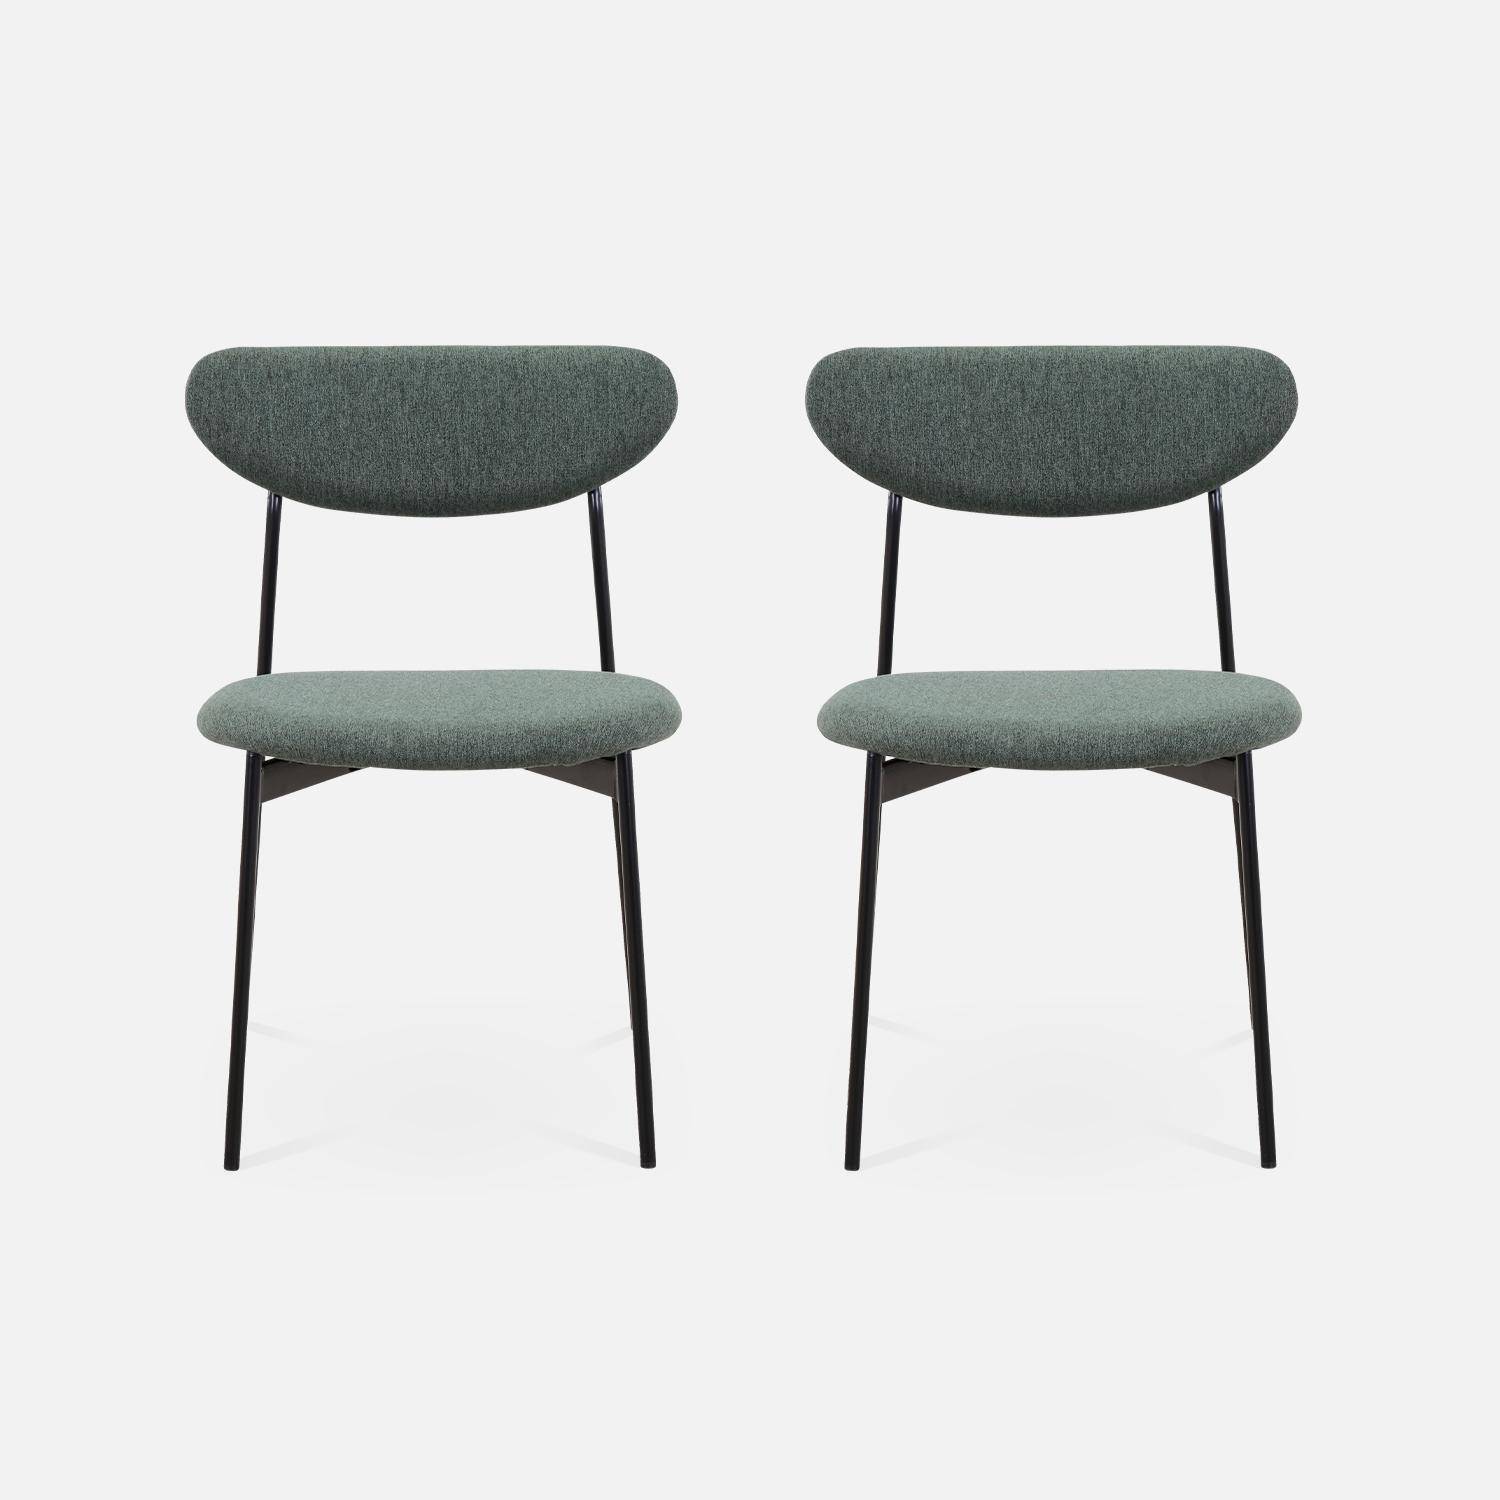 Set of 2 retro style dining chairs with steel legs - Arty - Green,sweeek,Photo4